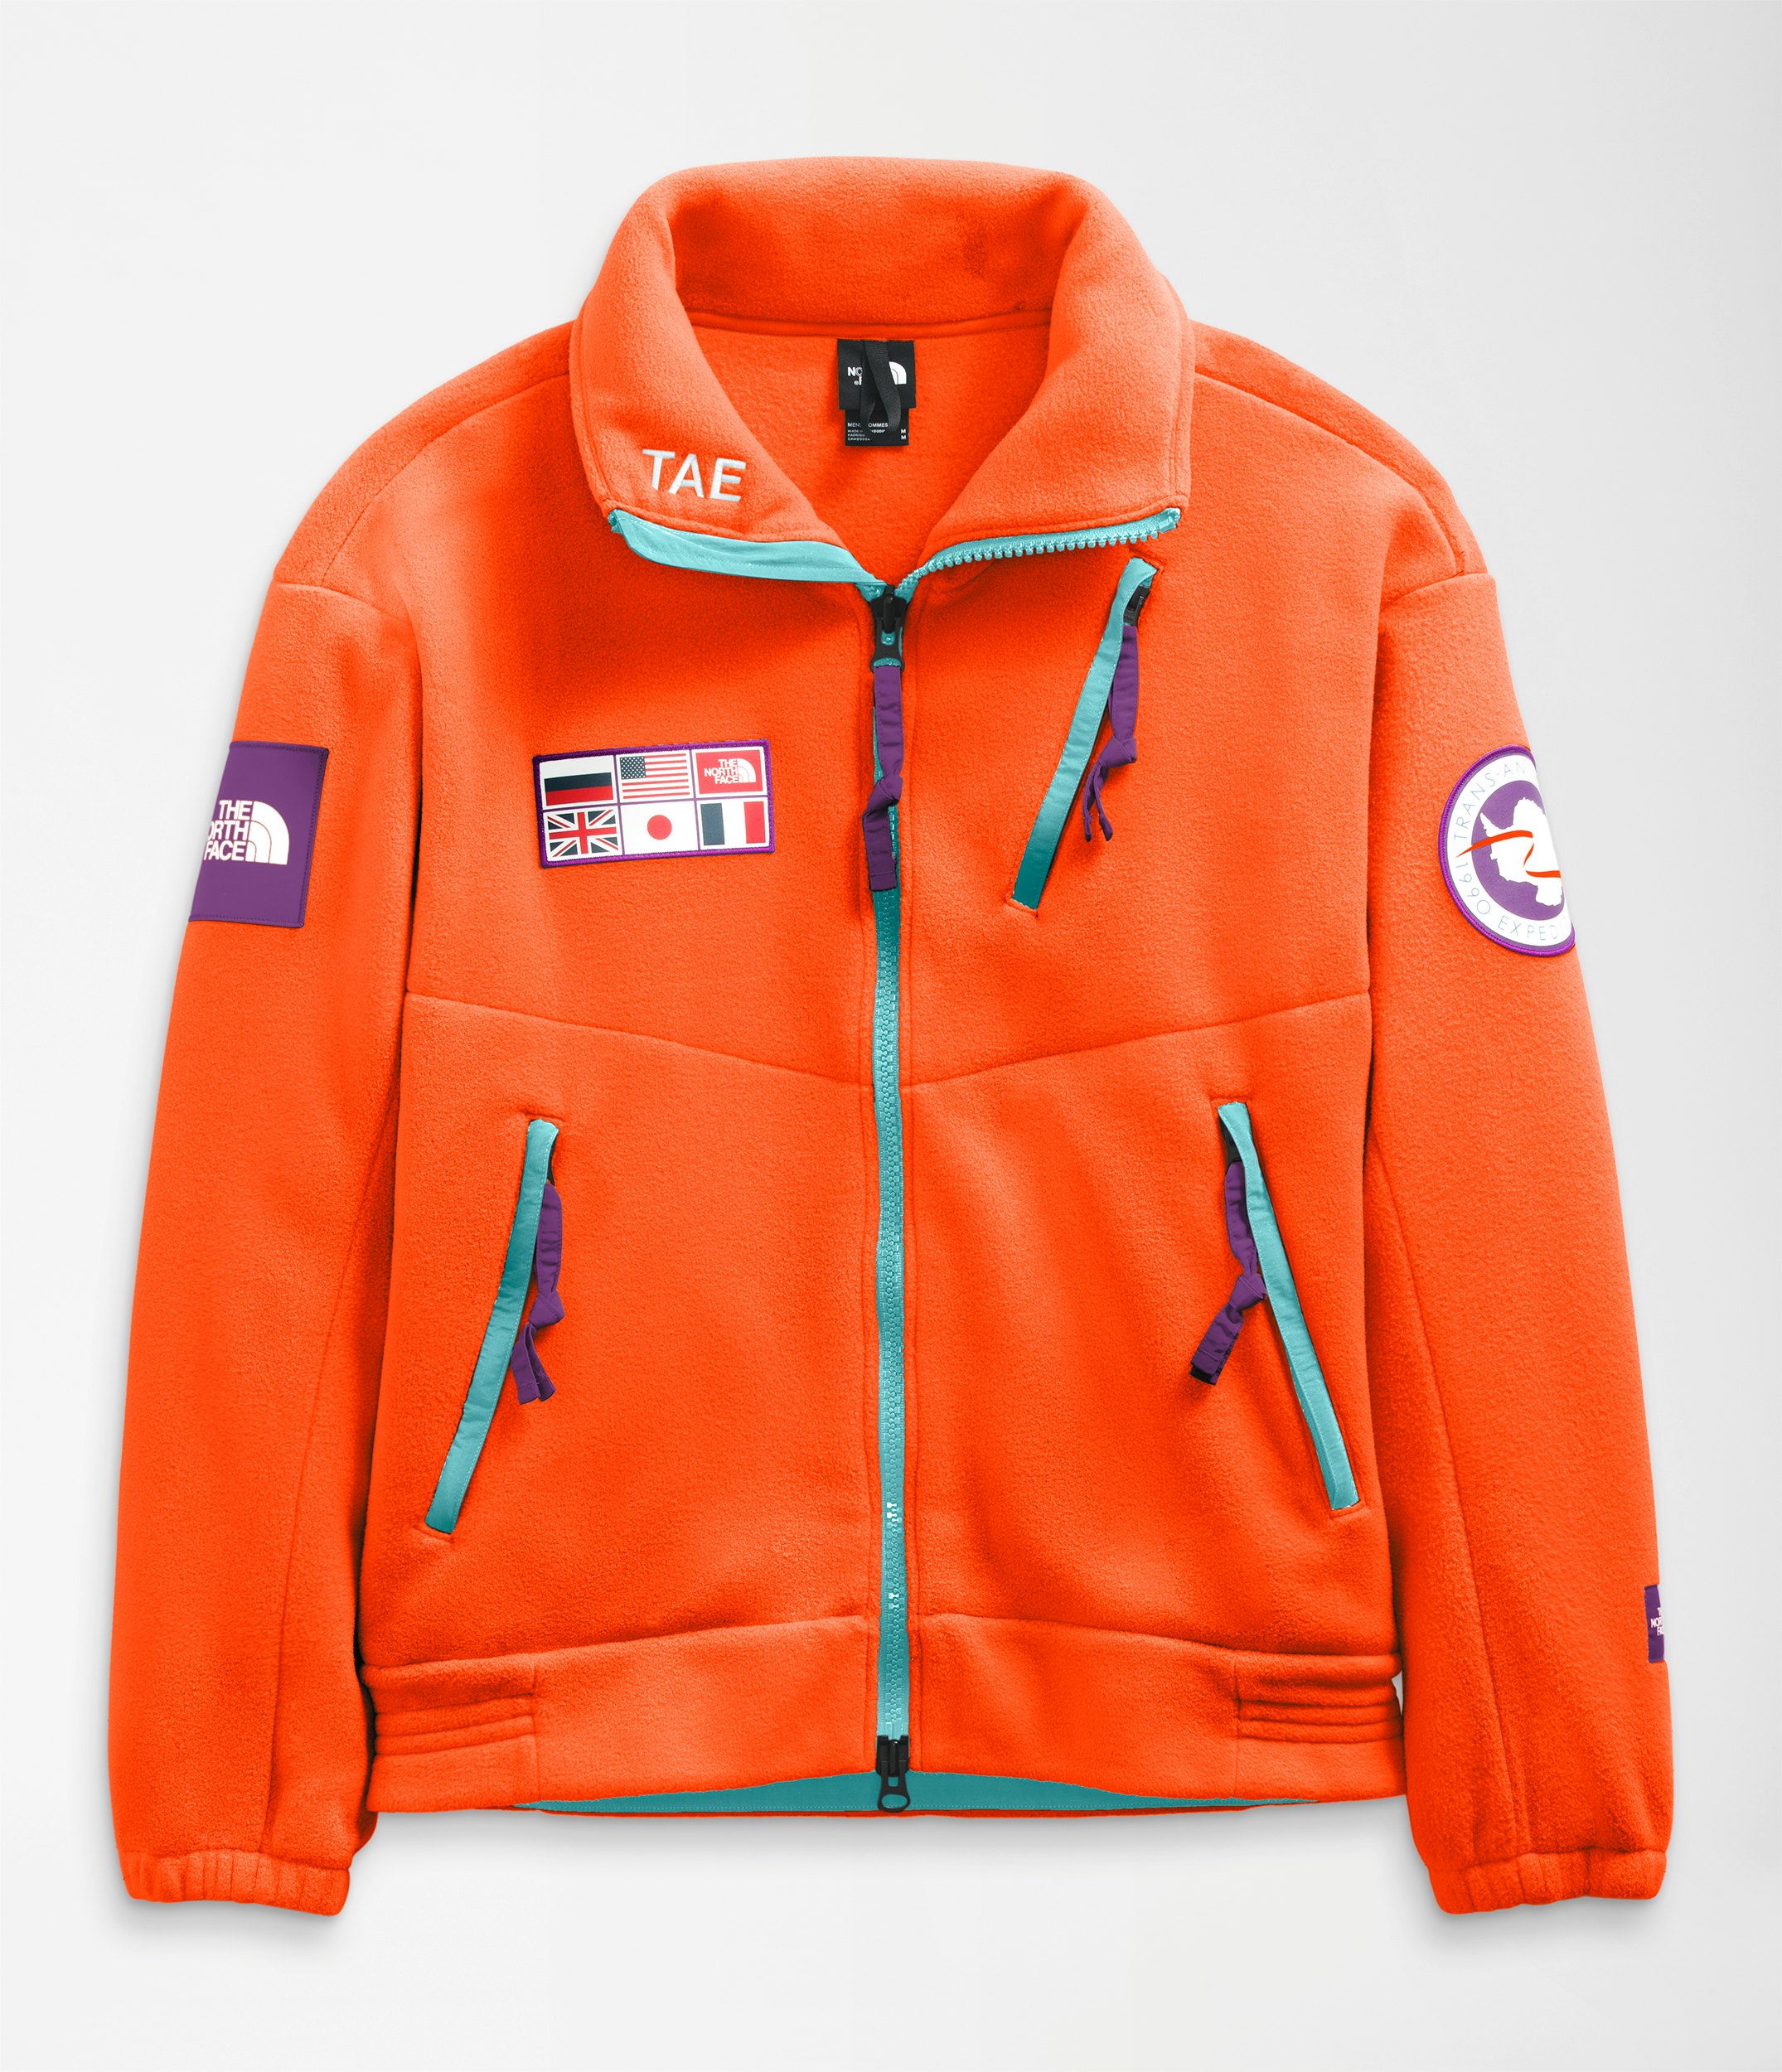 The North Face is bringing back its iconic Trans-Antarctica jackets